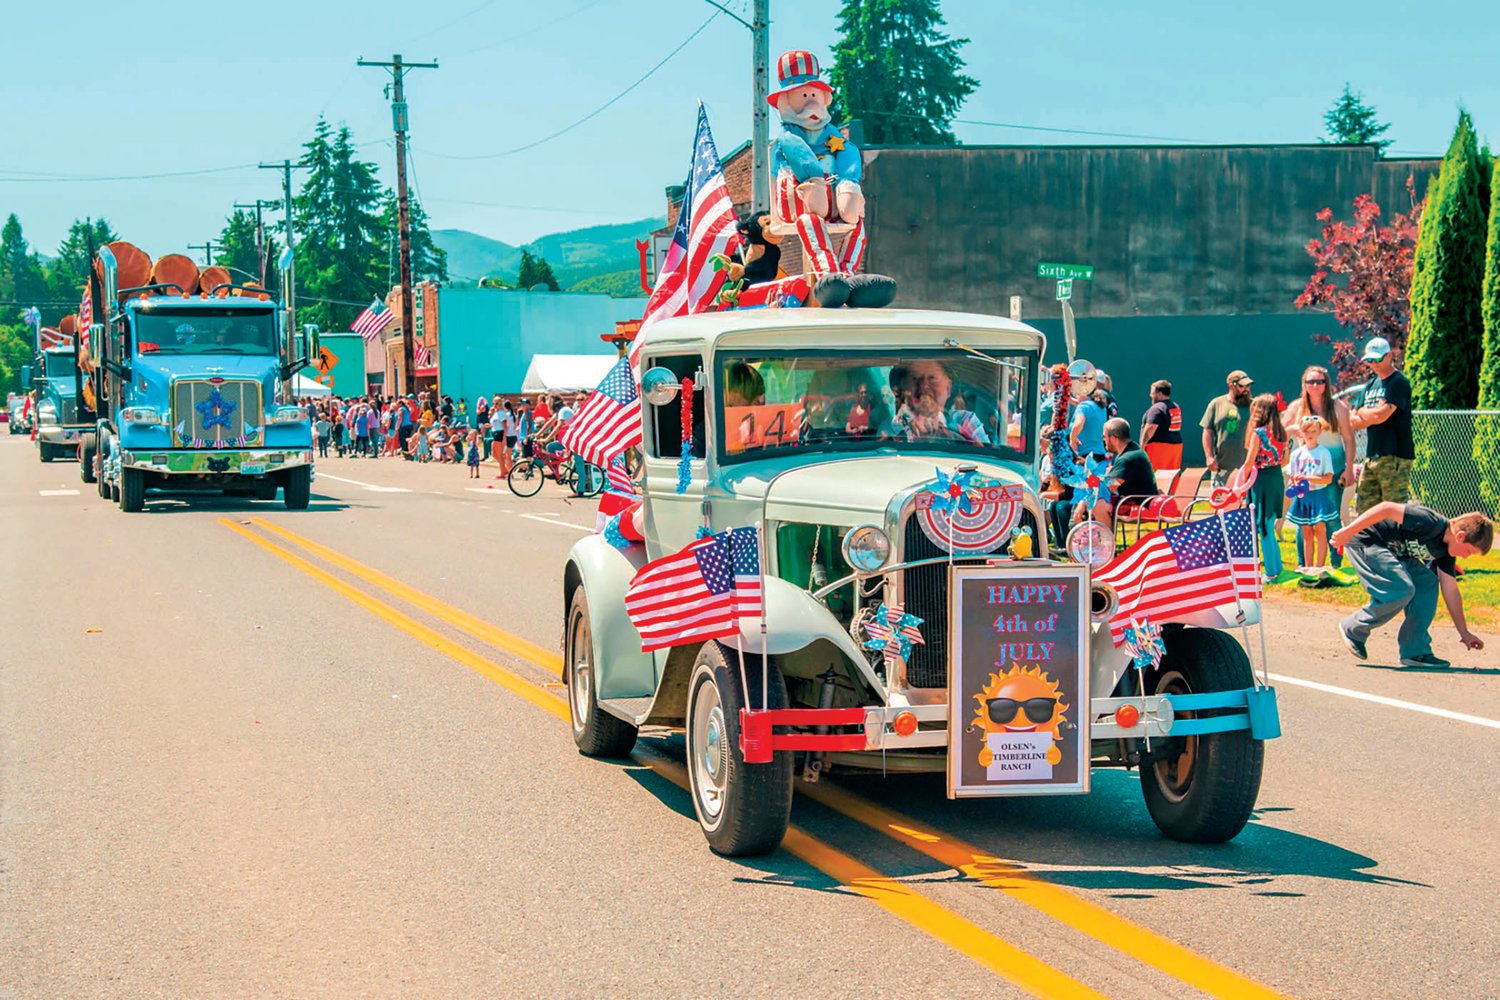 Vehicles decorated for Fourth of July celebrations make their way down North Main Street in downtown Pe Ell during a parade in 2021.